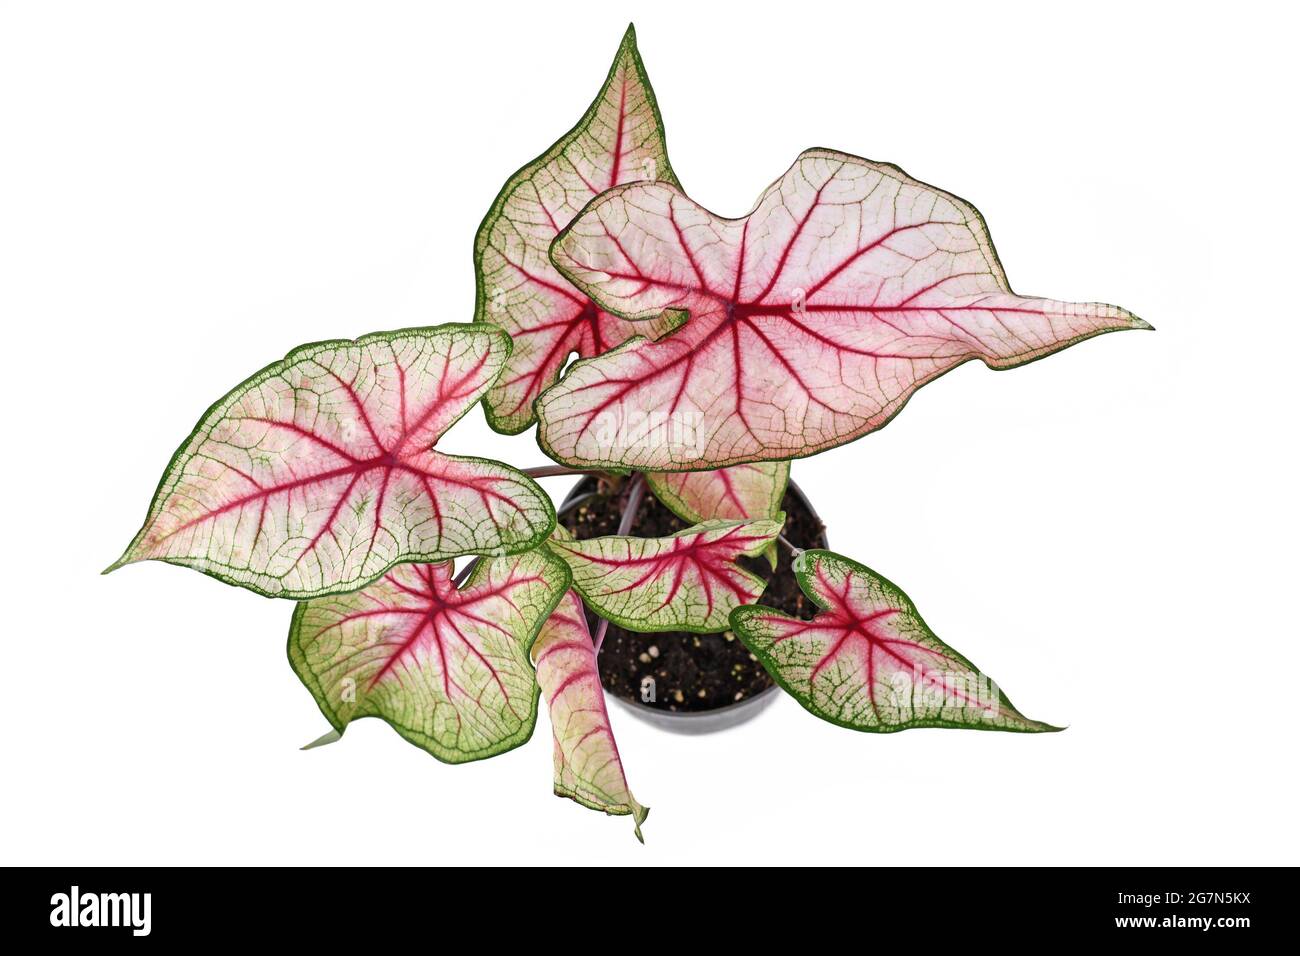 Top view of exotic 'Caladium White Queen' plant with white leaves and pink veins in pot isolated on white background Stock Photo